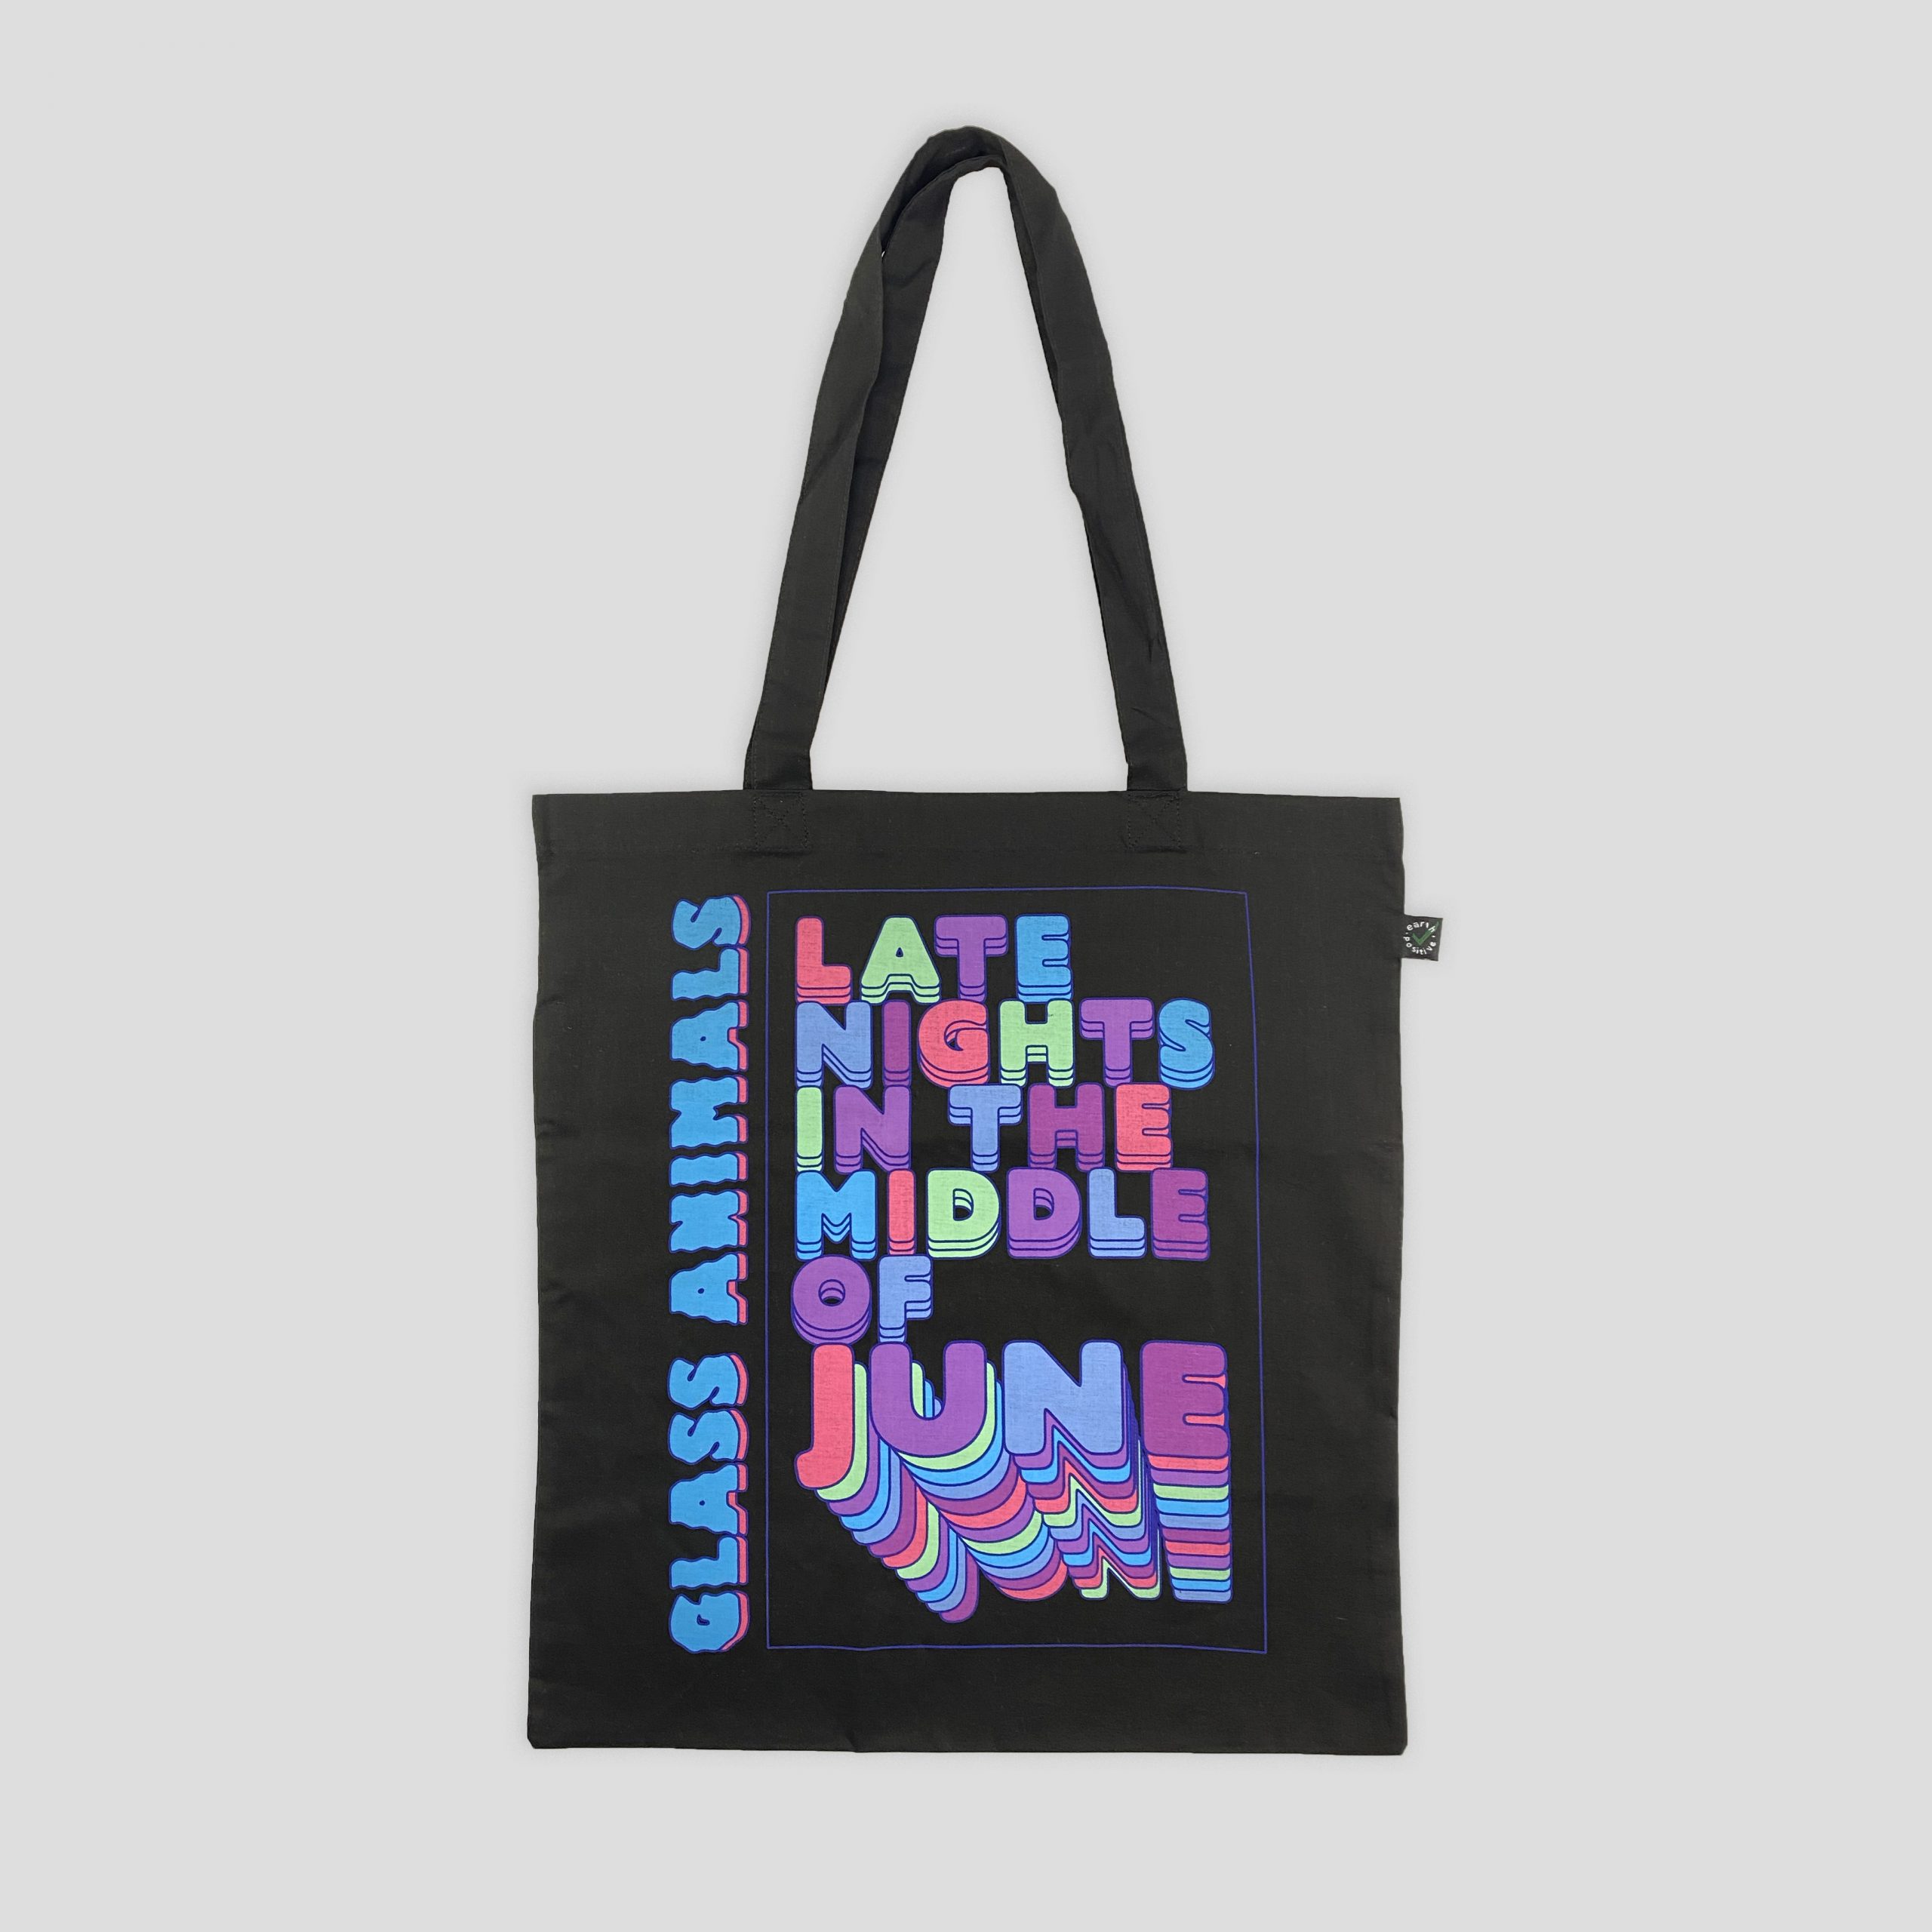 Screen printed organic textile merchandise | Canvas Tote Bags